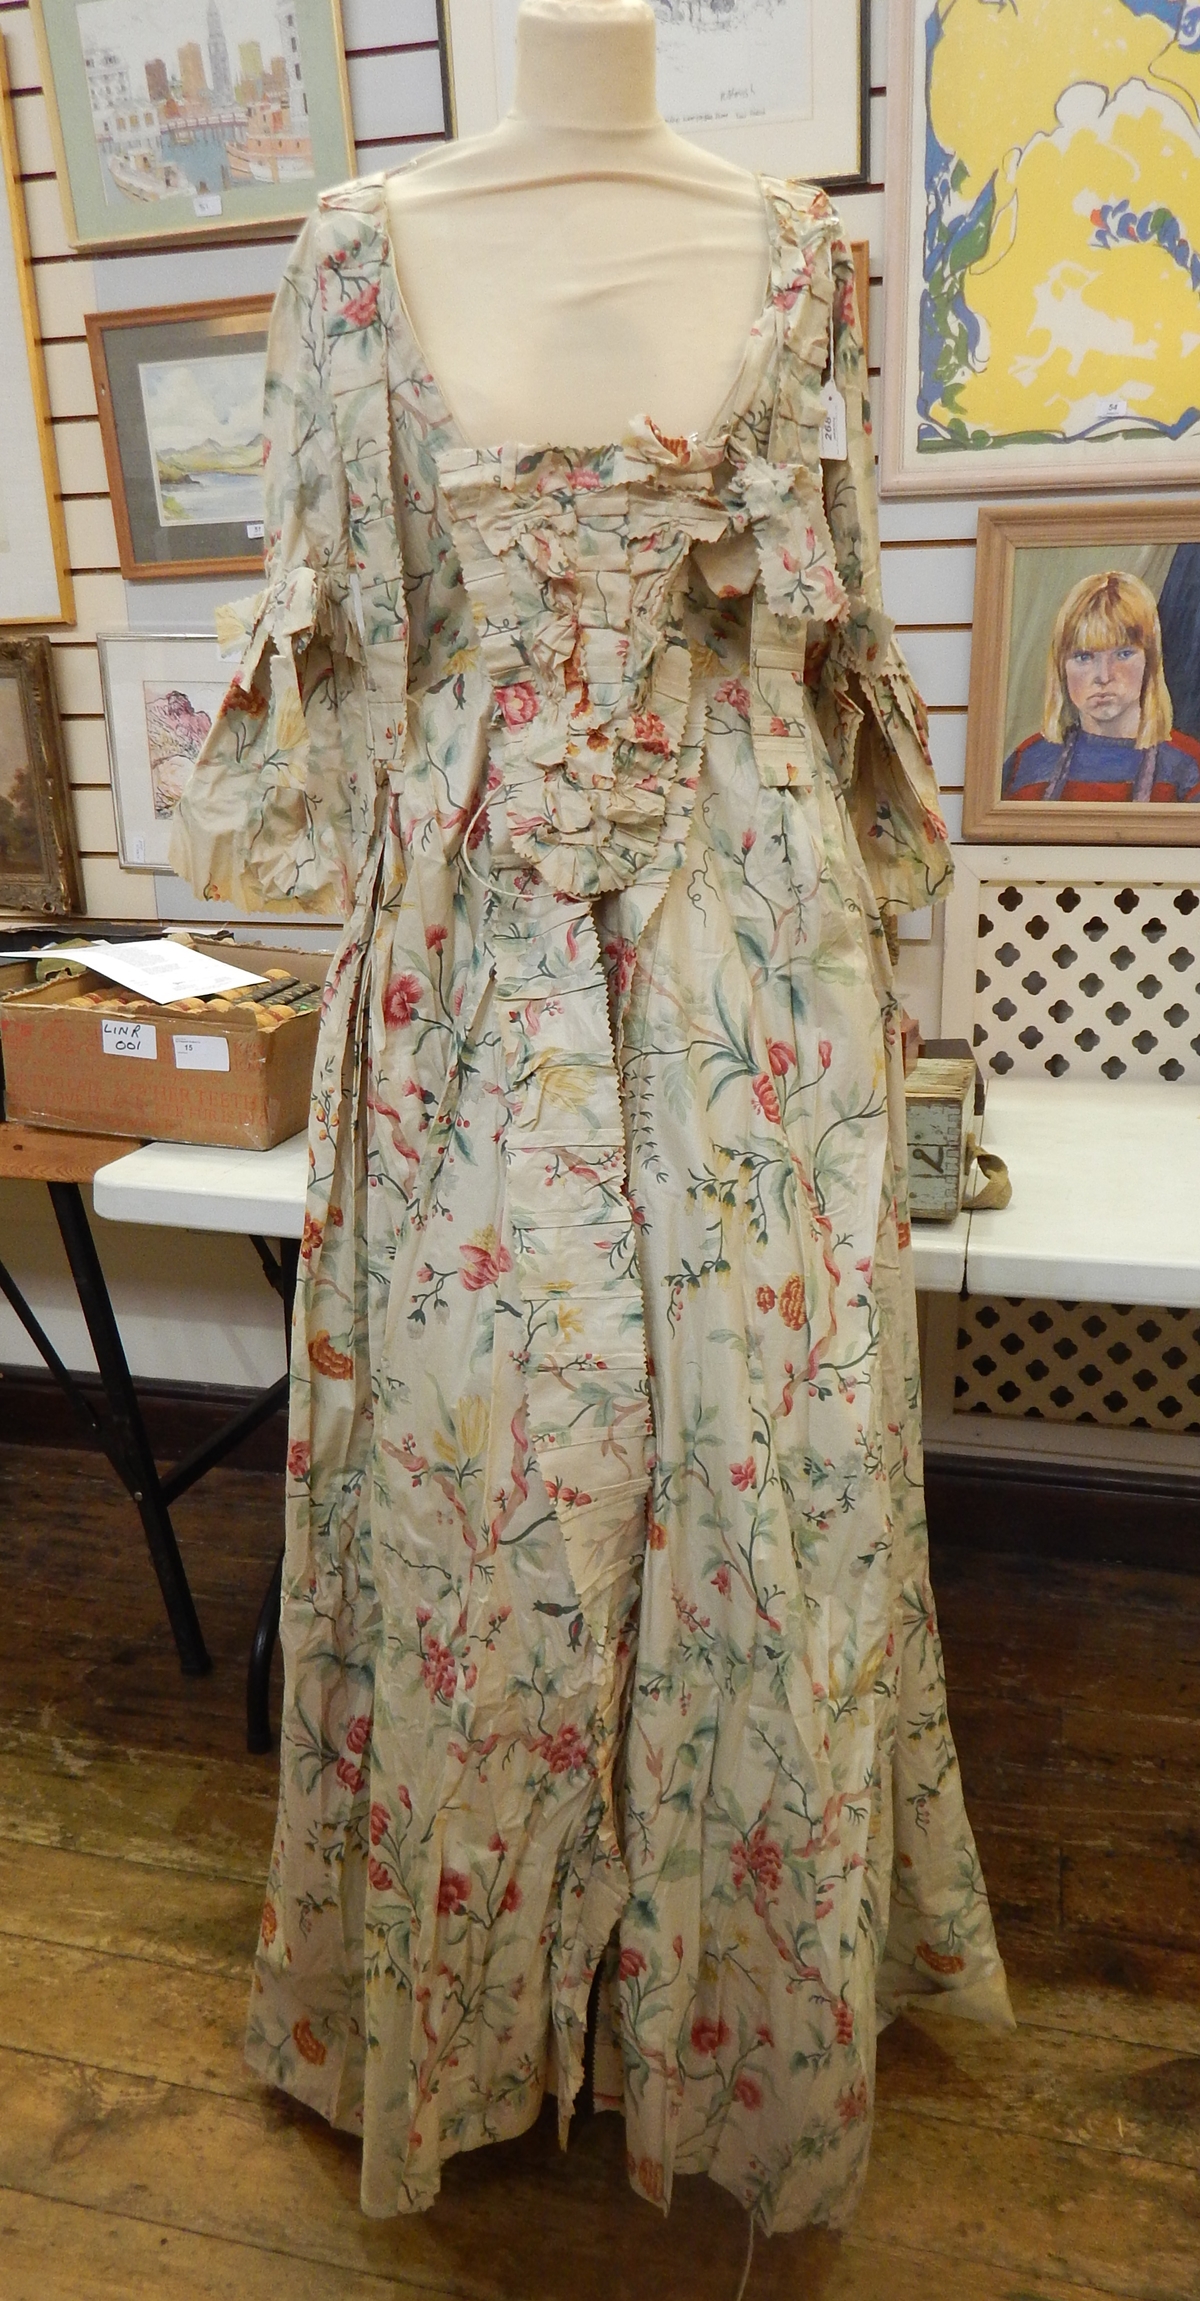 A hand stitched floral glazed cotton dress, 18th century style,